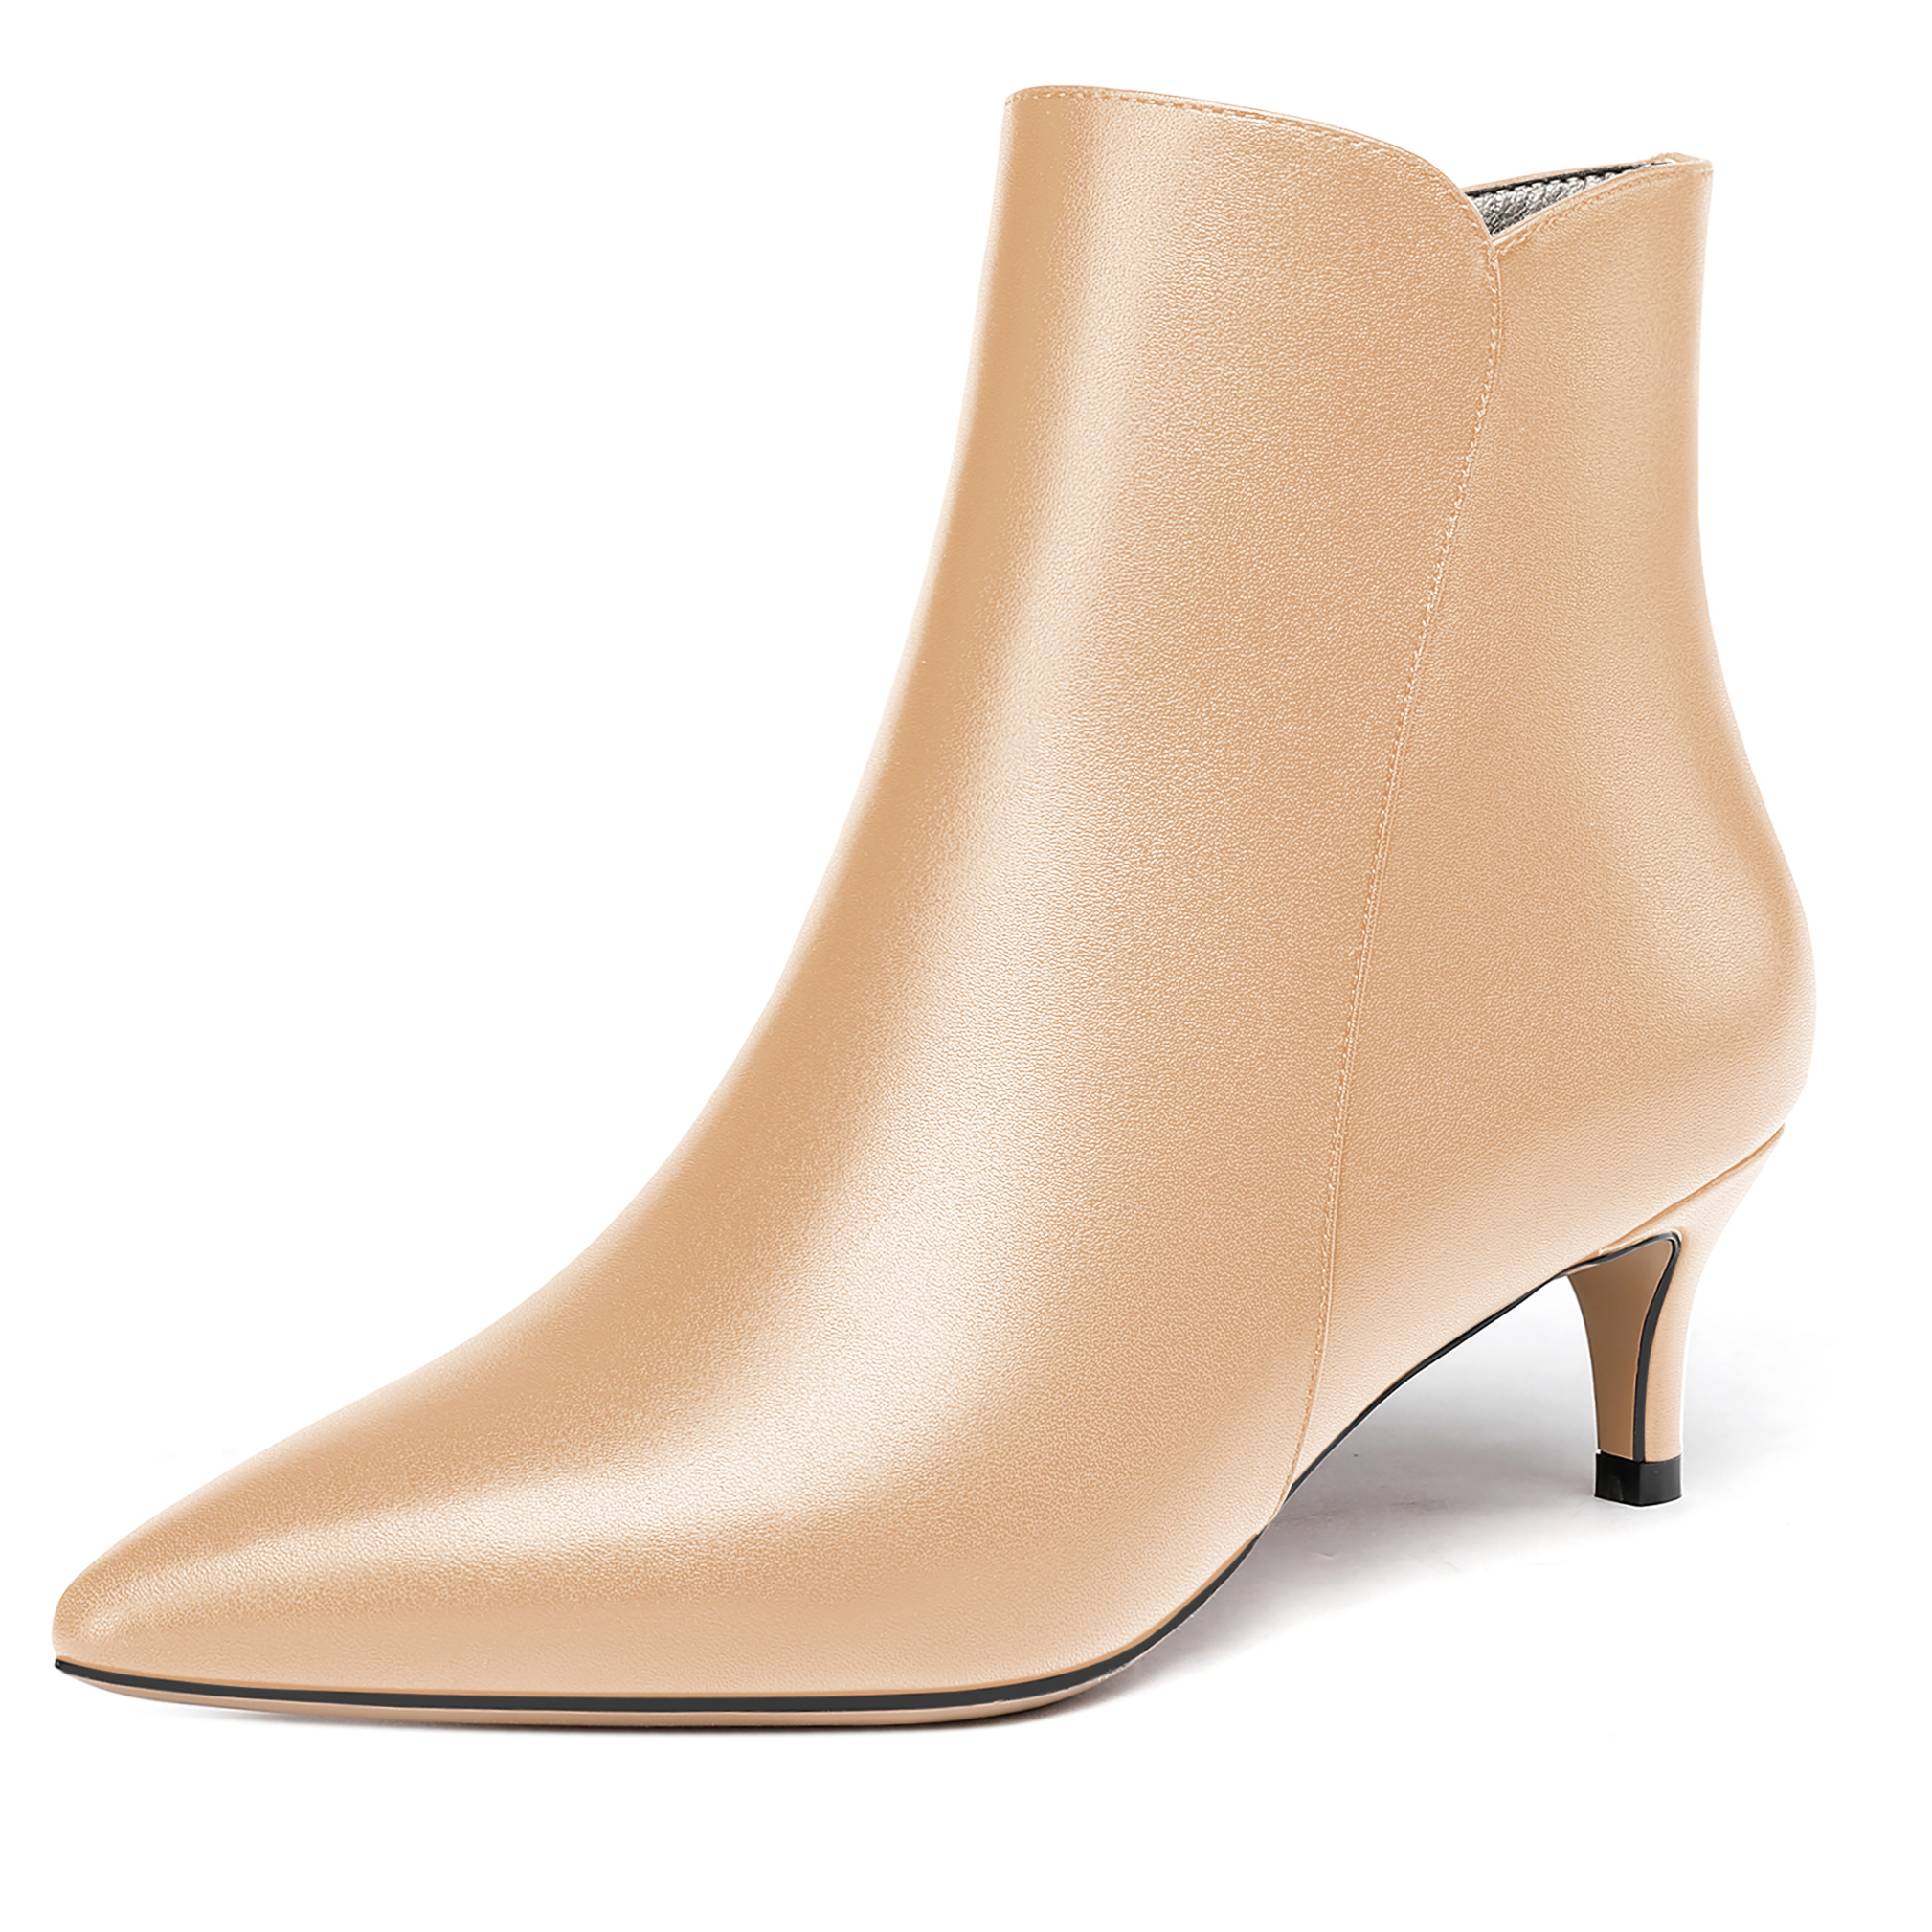 Aliyanna Pointed Toe Zip Matte Ankle High Boots